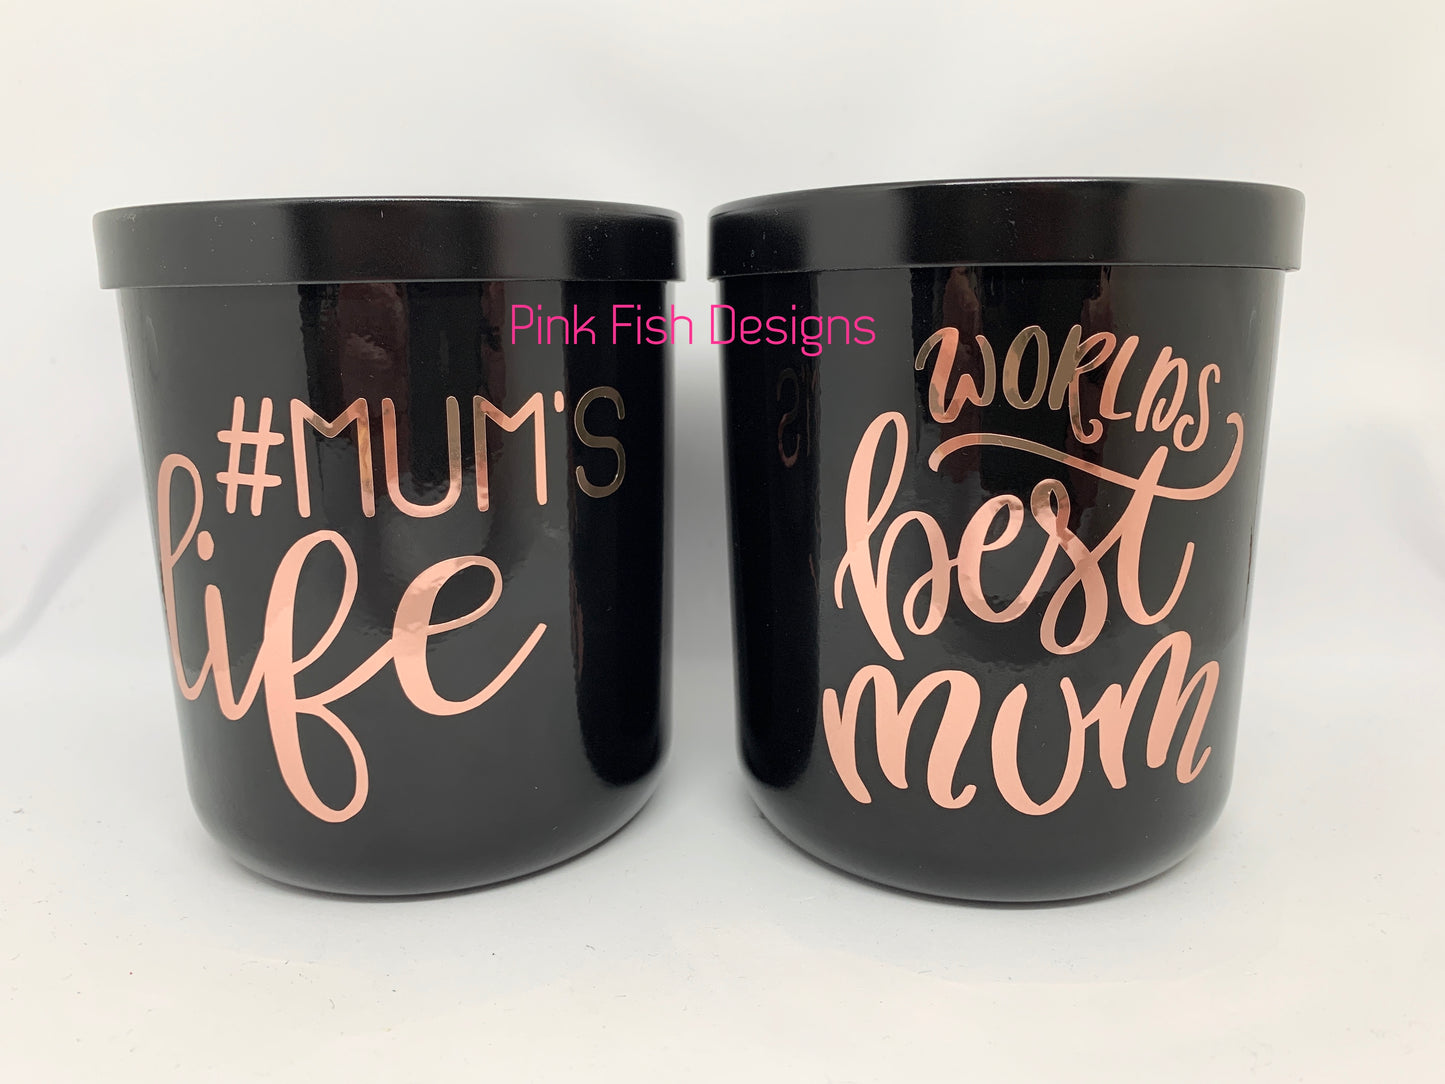 # Mums Life or Worlds Best Mum 400ml Soy Candle & Black Gloss Box